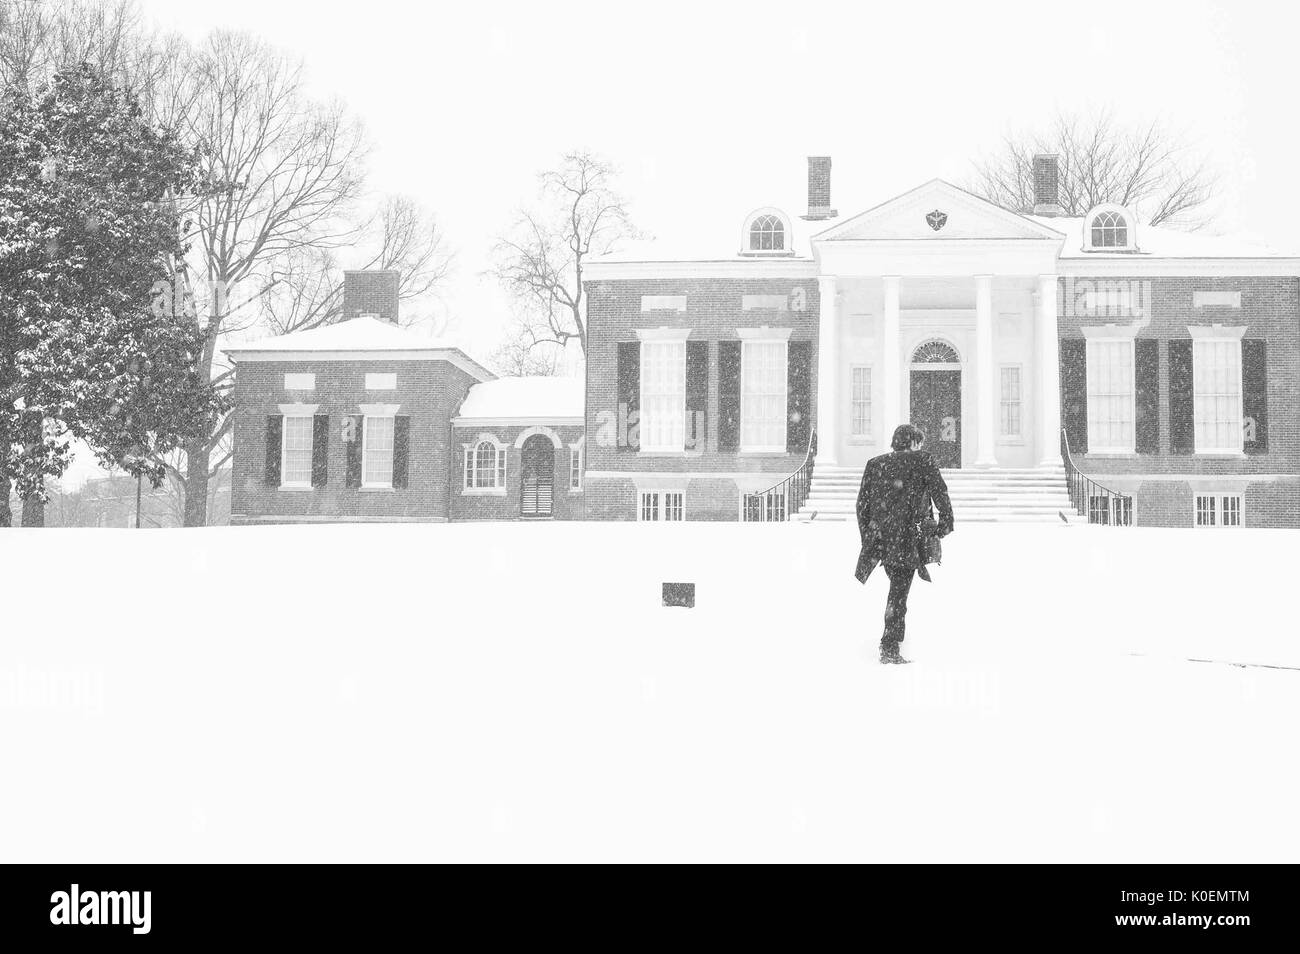 A man walks up to the Homewood Museum, whose collections include fine and decorative arts reminiscent of early-19th-century Baltimore life, on the snow-covered Homewood campus of the Johns Hopkins University in Baltimore, Maryland, 1996. Courtesy Eric Chen. Stock Photo